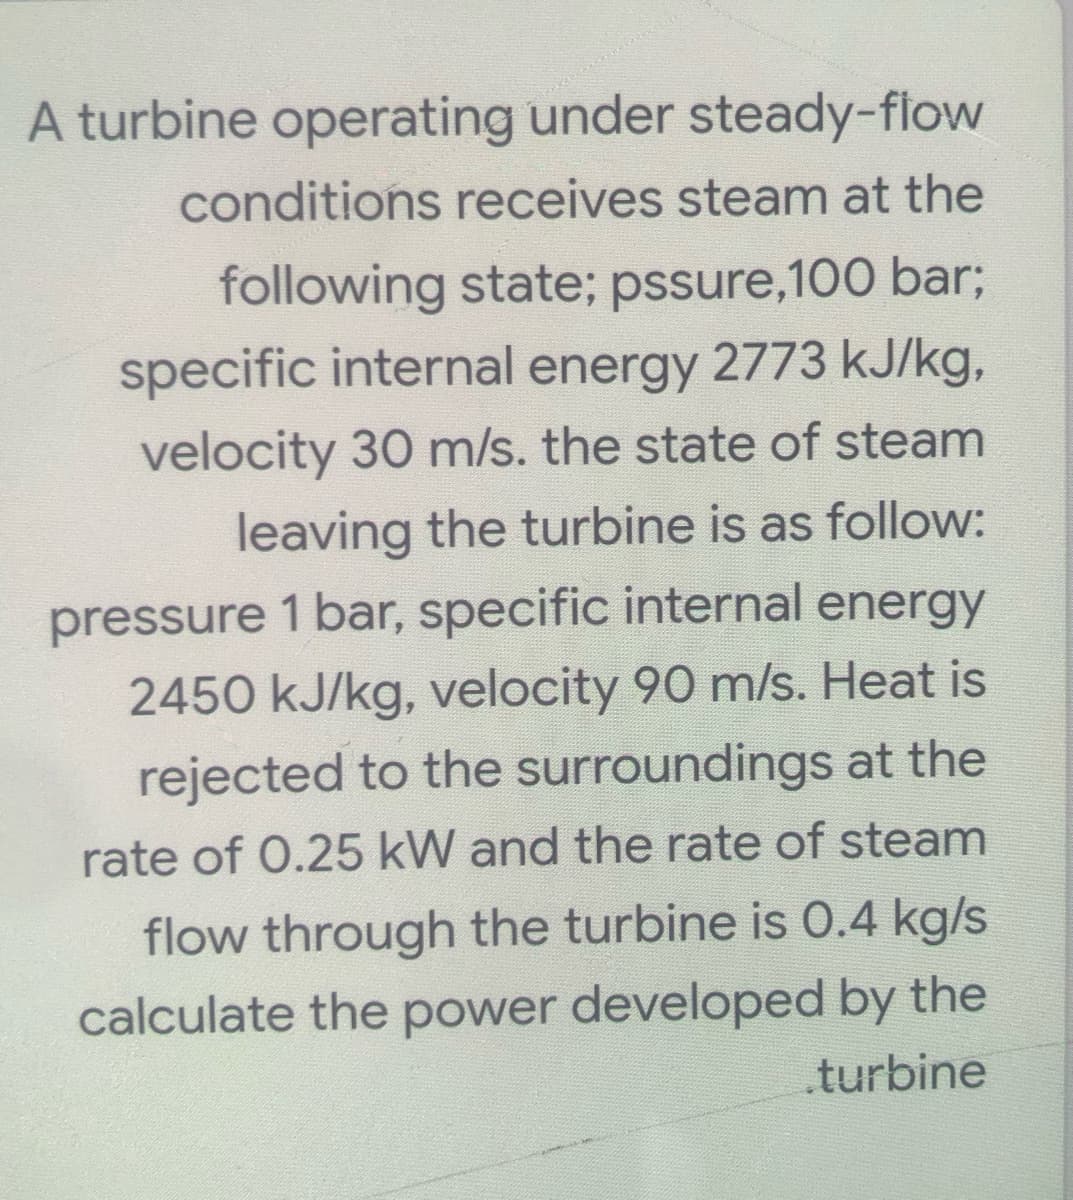 A turbine operating under steady-flow
conditions receives steam at the
following state; pssure,100 bar;
specific internal energy 2773 kJ/kg,
velocity 30 m/s. the state of steam
leaving the turbine is as follow:
pressure 1 bar, specific internal energy
2450 kJ/kg, velocity 90 m/s. Heat is
rejected to the surroundings at the
rate of 0.25 kW and the rate of steam
flow through the turbine is 0.4 kg/s
calculate the power developed by the
.turbine
